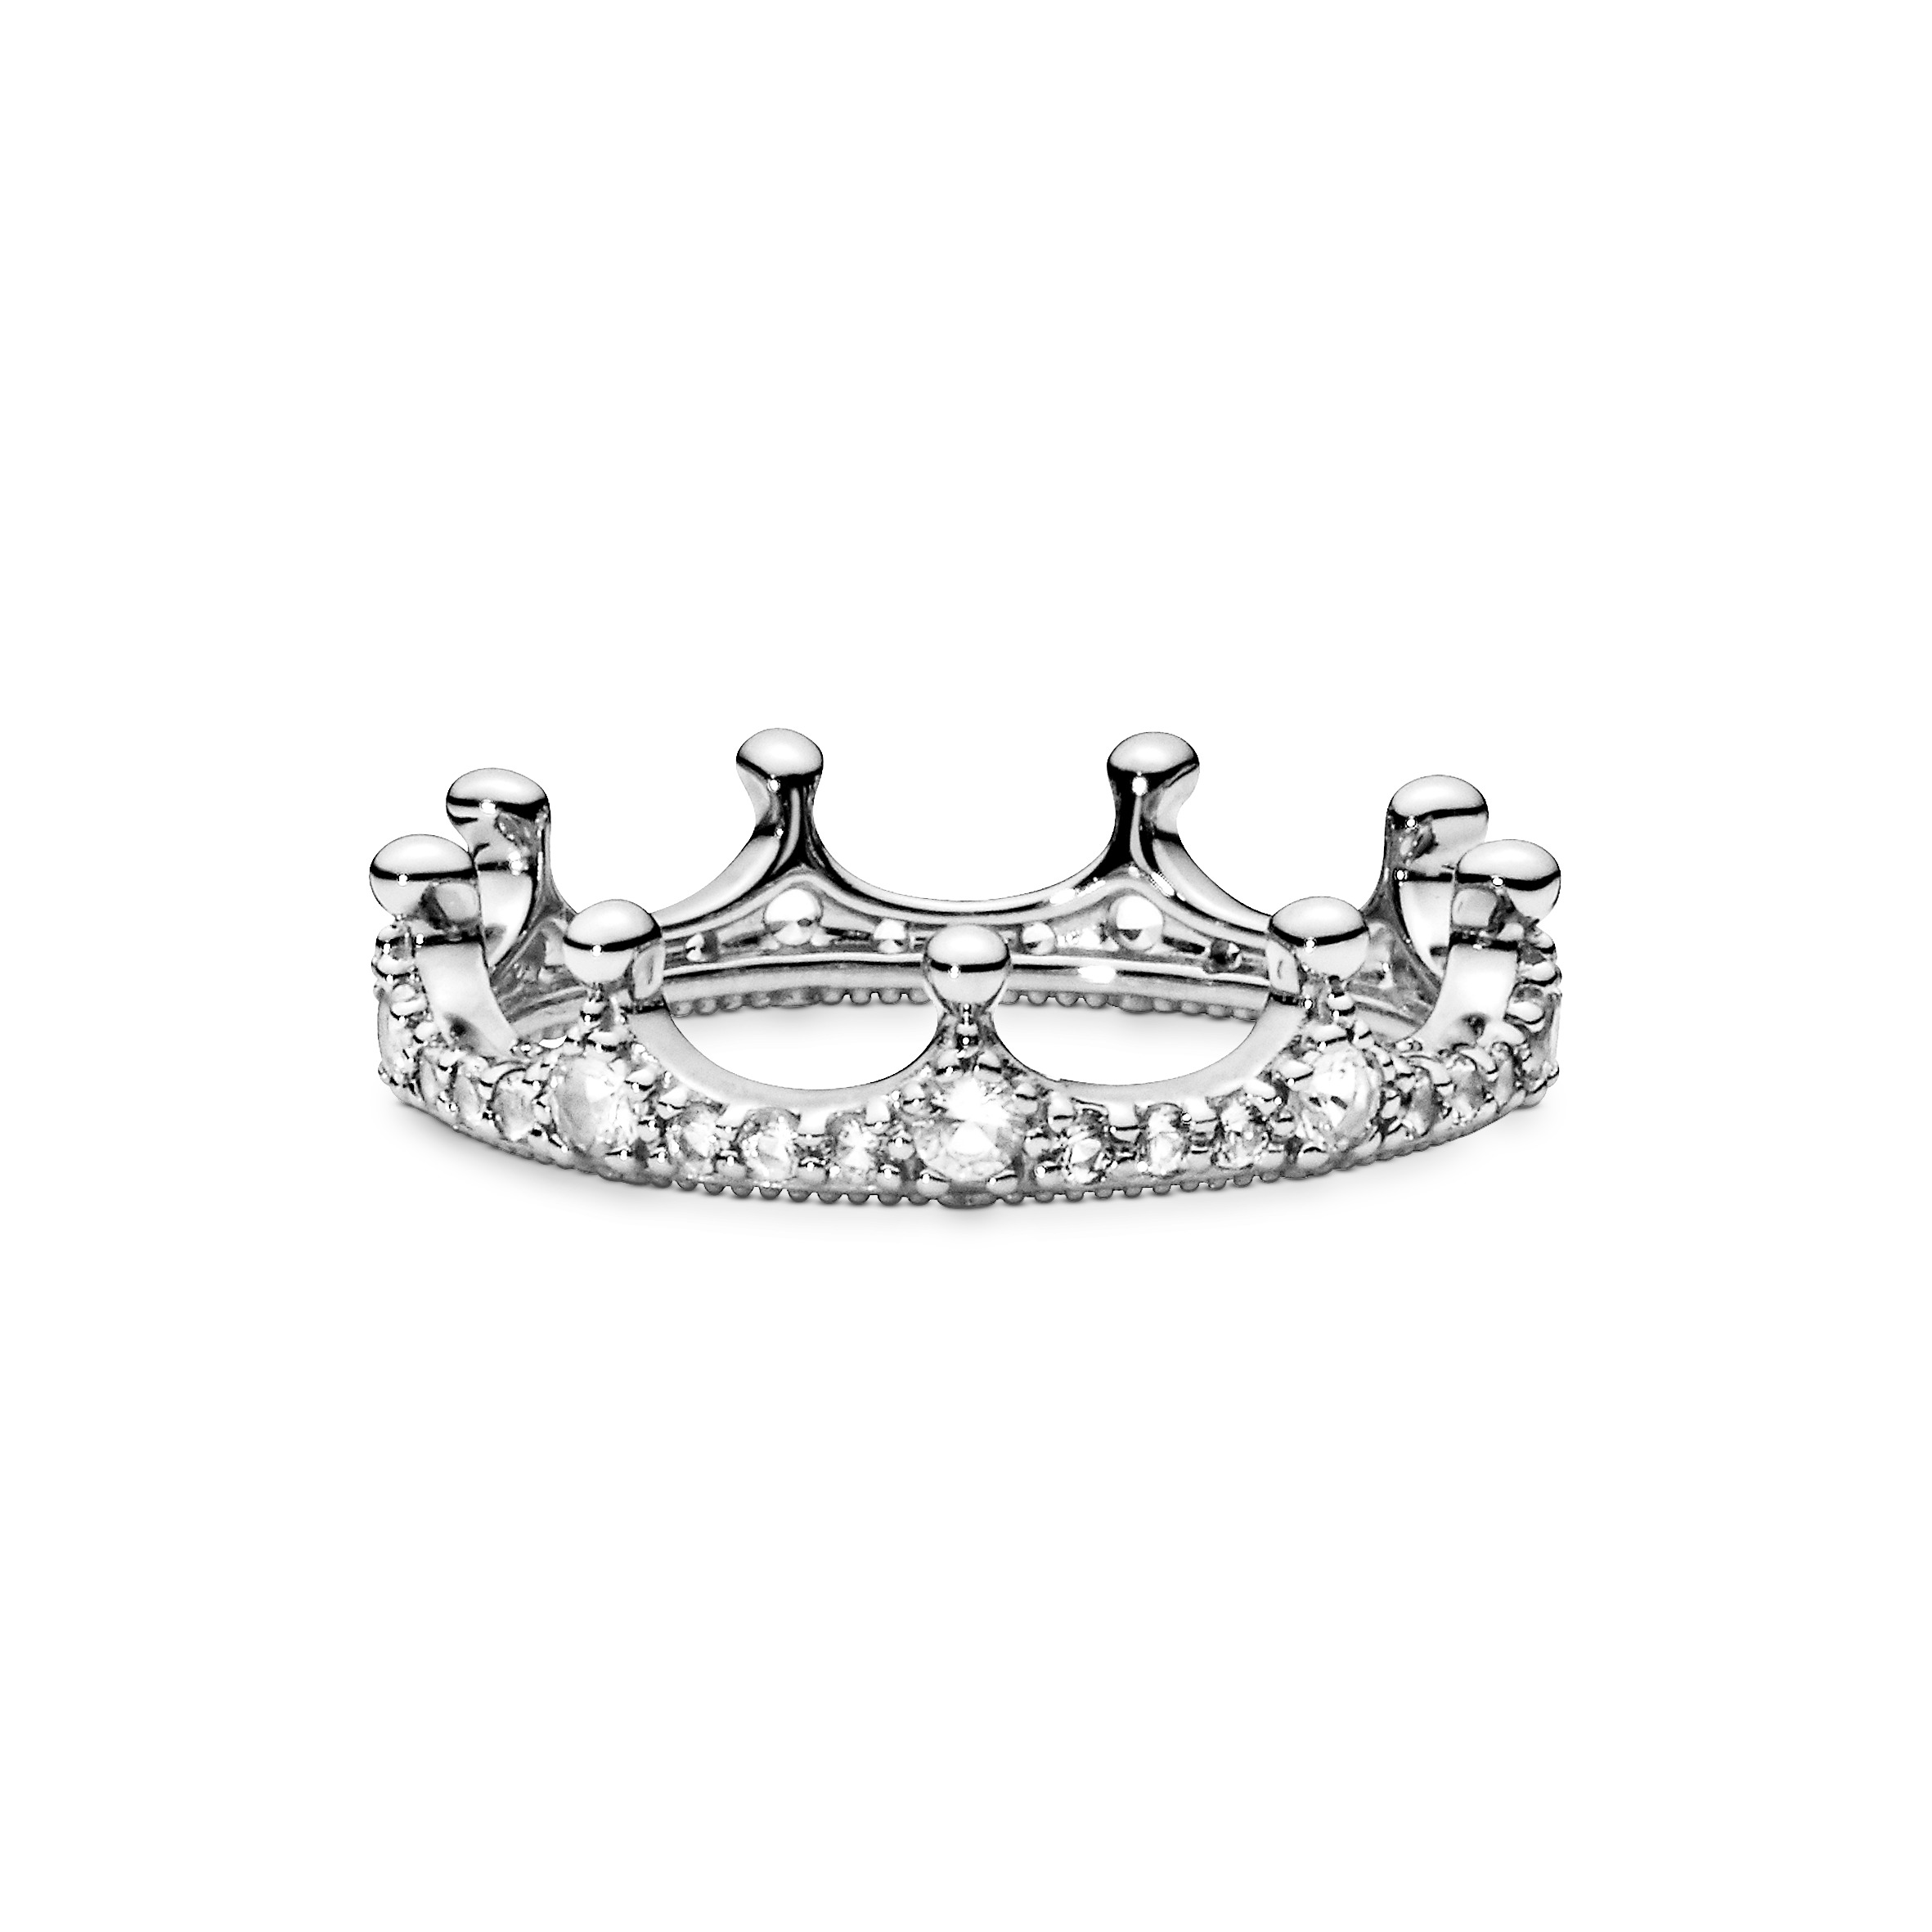 Every Princess needs a crown (ring)